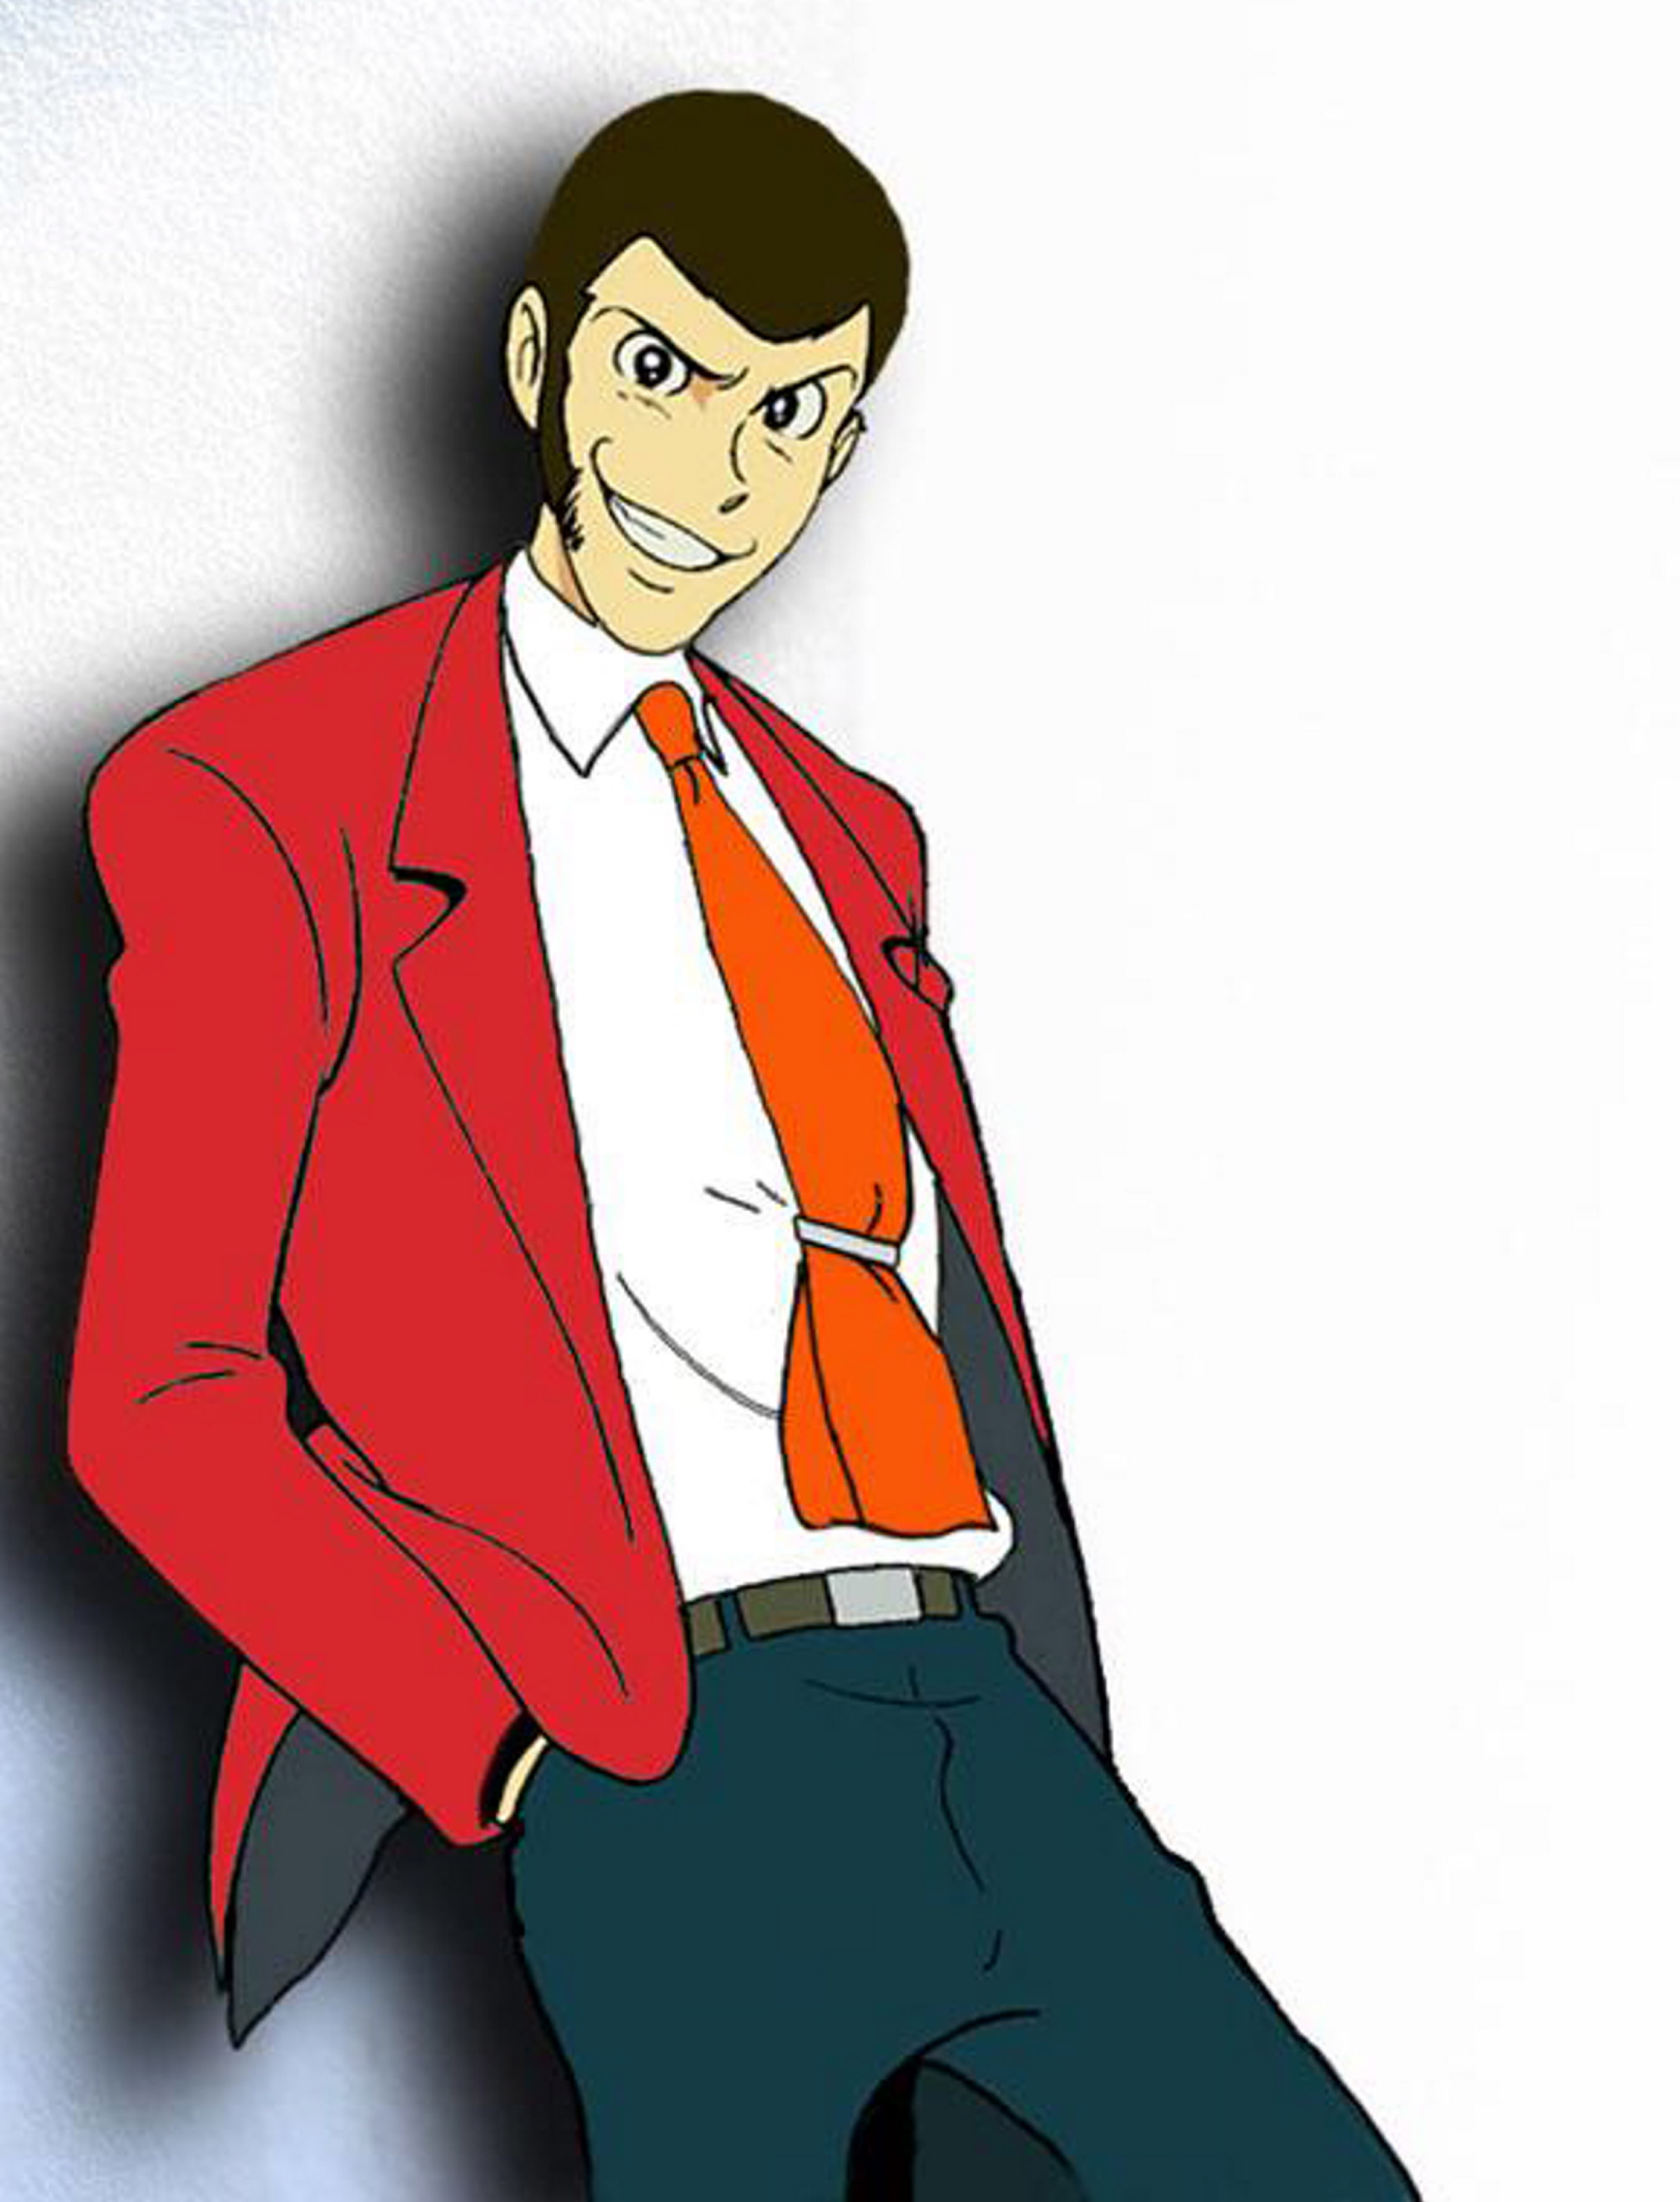 Download this Lupin picture